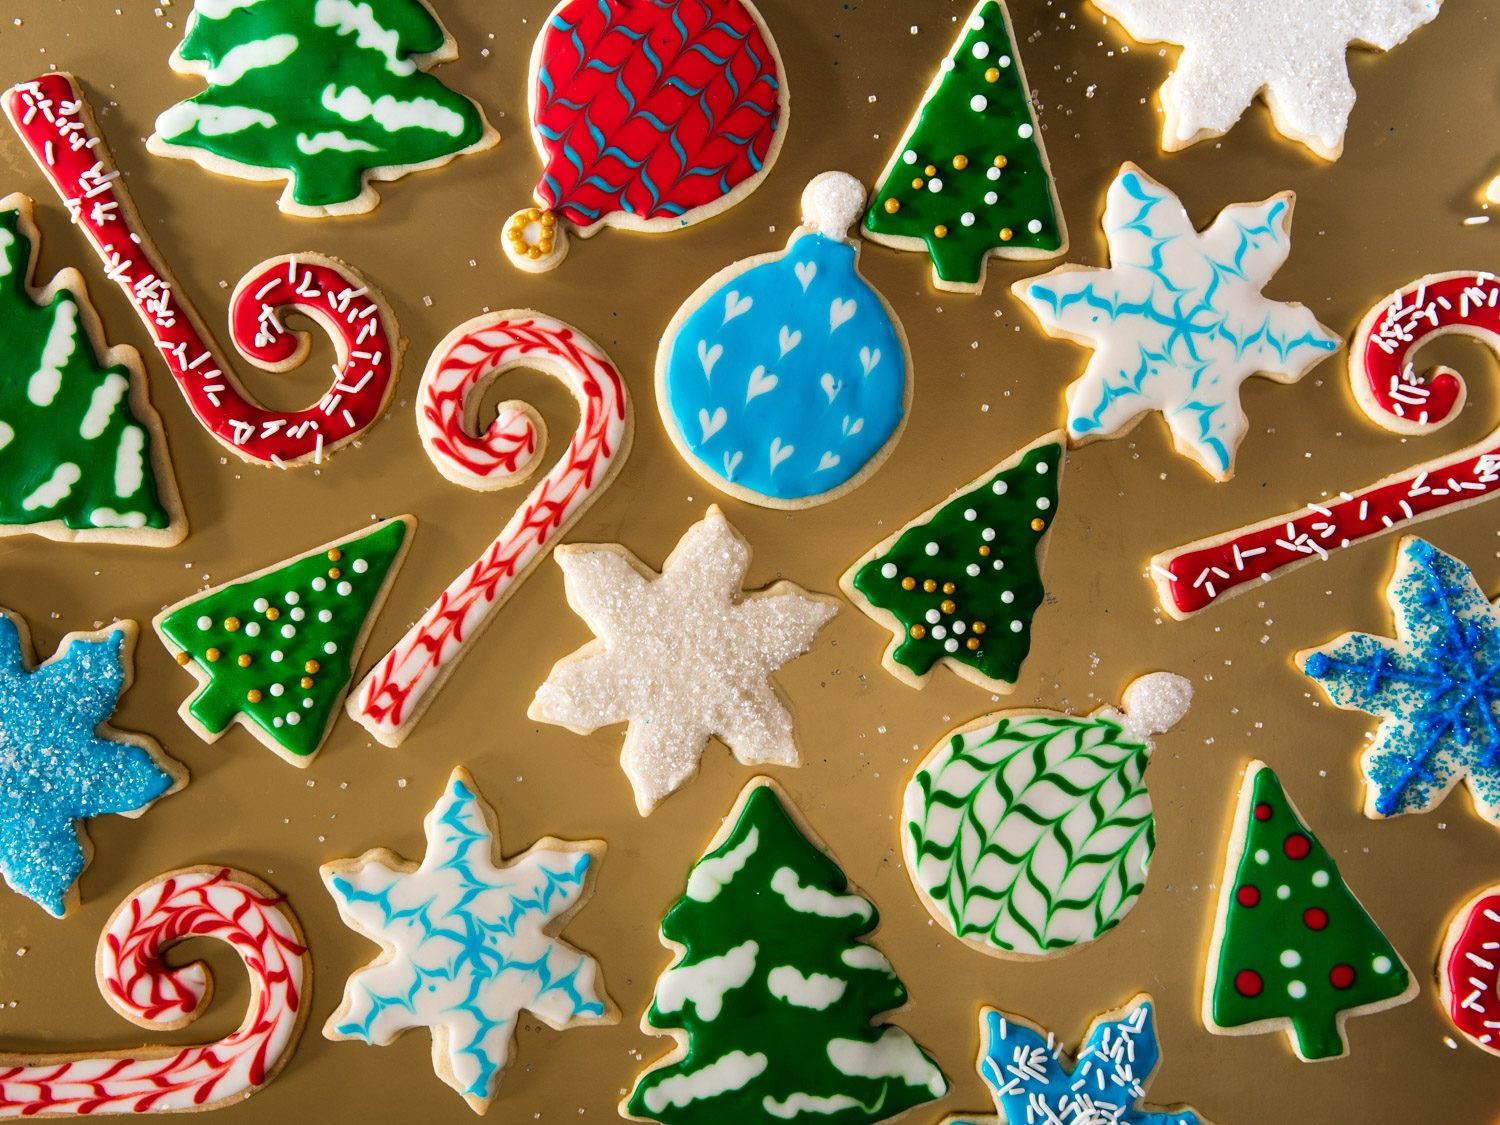 Decorate Christmas Cookies
 A Royal Icing Tutorial Decorate Christmas Cookies Like a